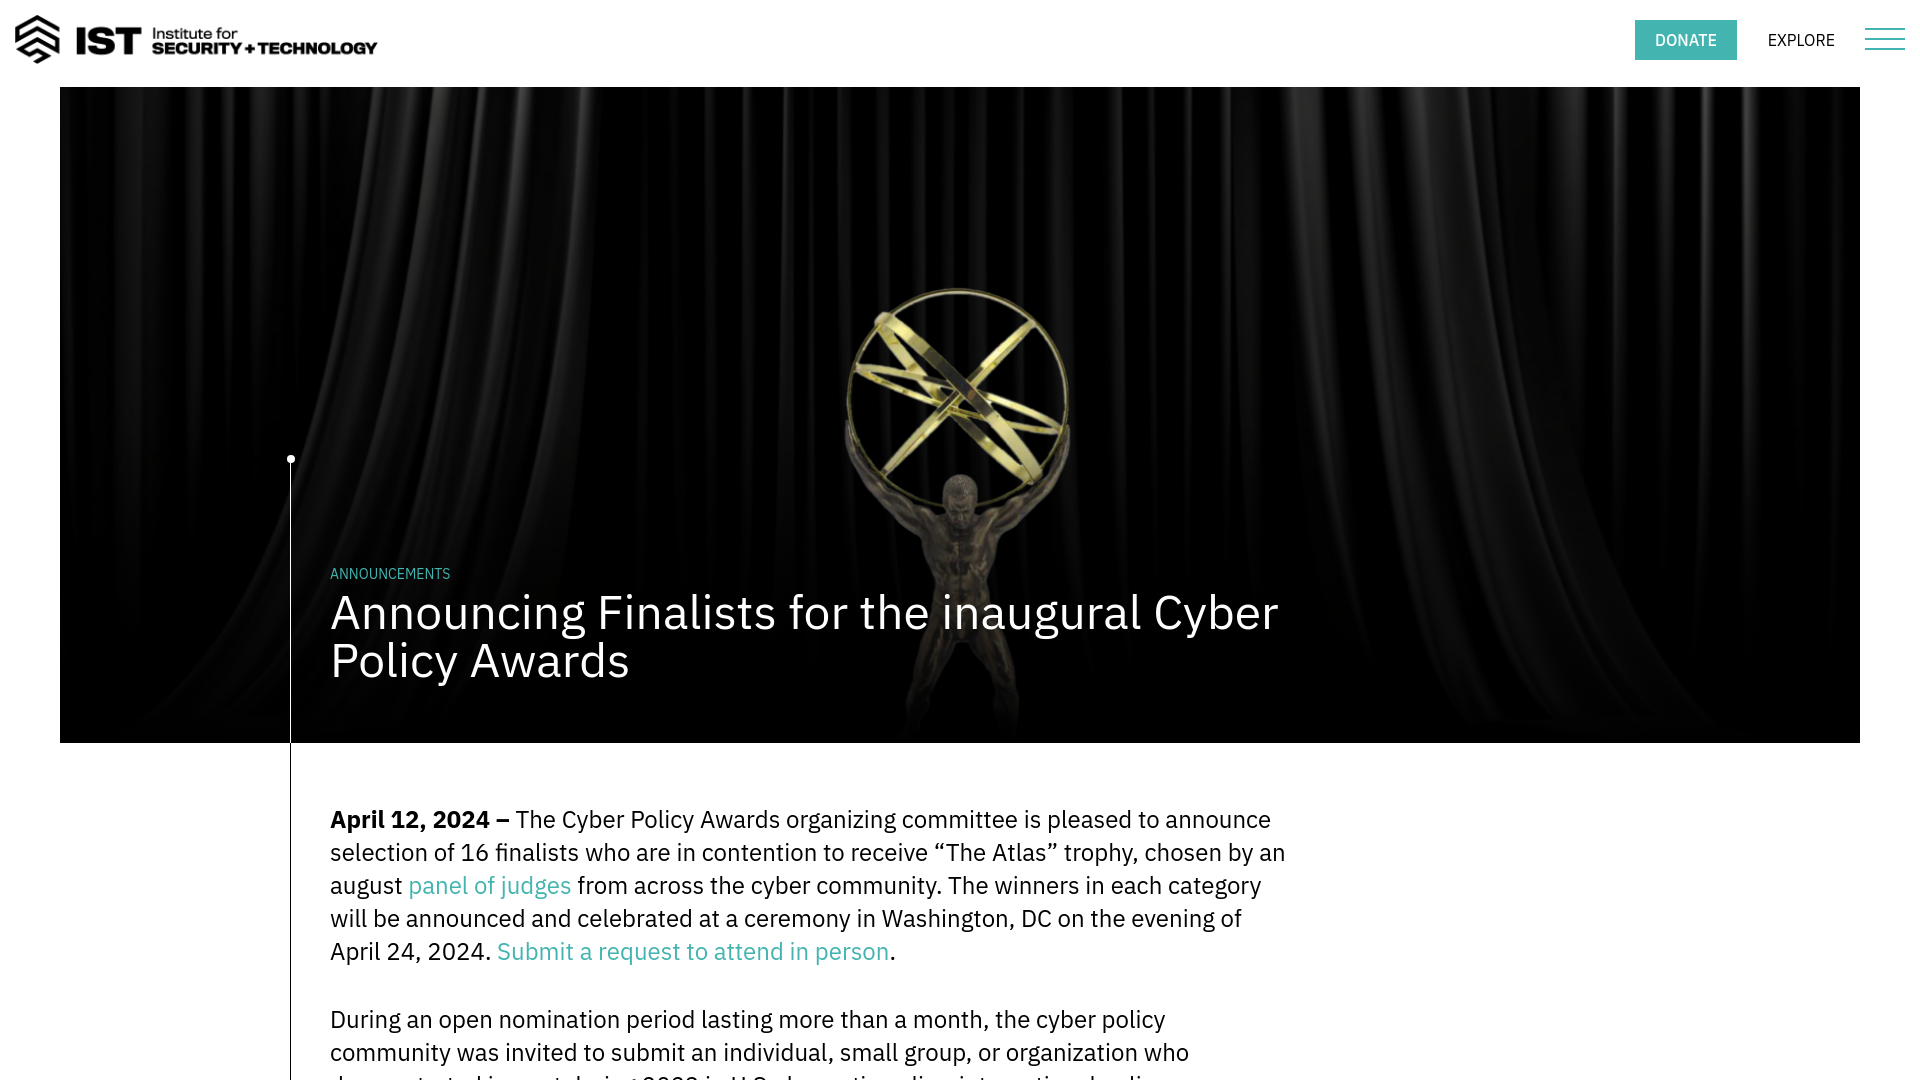 Institute for Security and TechnologyAnnouncing Finalists for the inaugural Cyber Policy Awards - Institute for Security and Technology